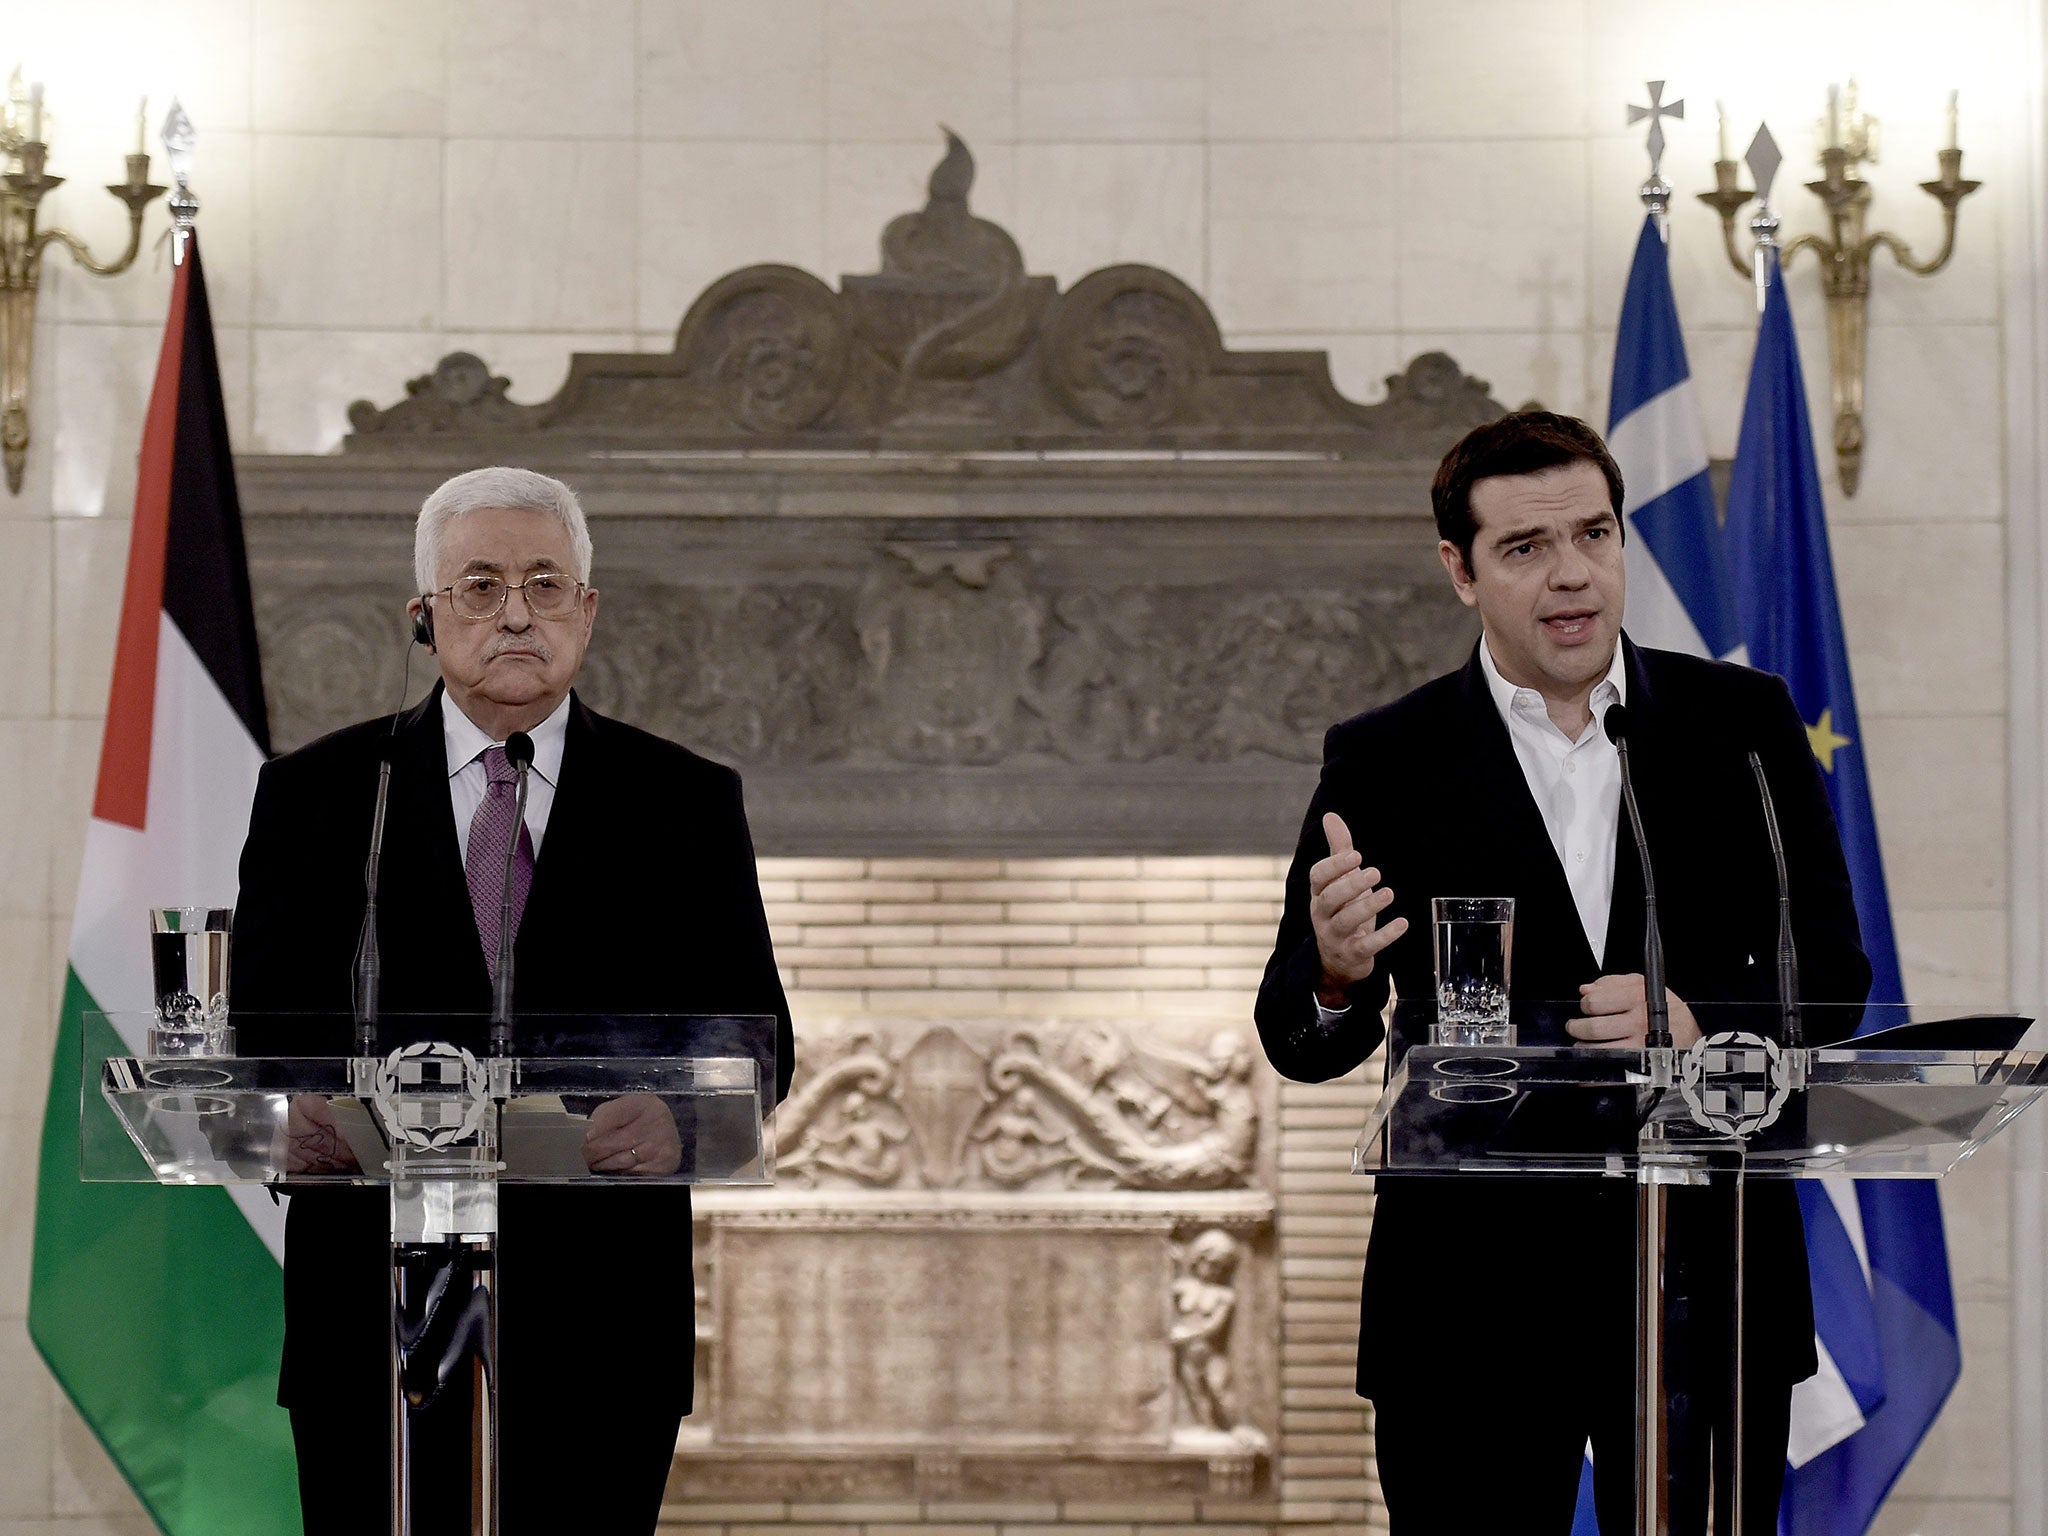 Greek Prime Minister Alexis Tsipras (R) and Palestinian president Mahmoud Abbas speak during a press conference after a meeting on December 21, 2015 in Athens